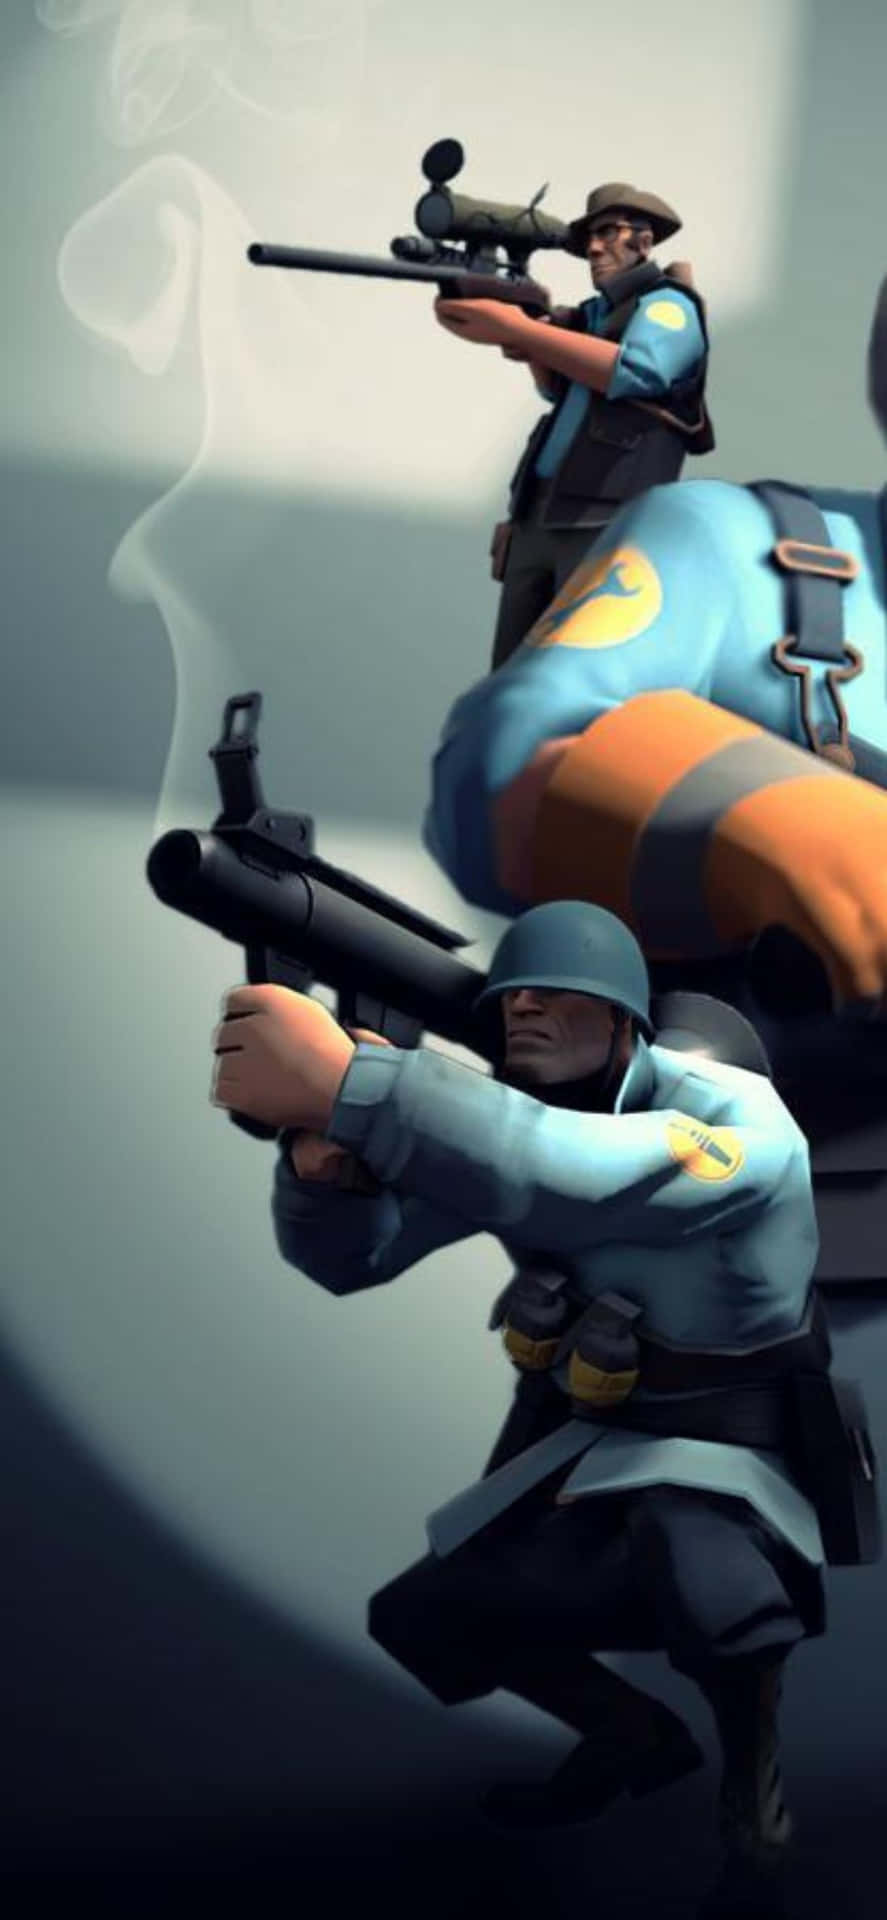 iPhone XS Team Fortress 2 Characters With Blue Uniforms Background